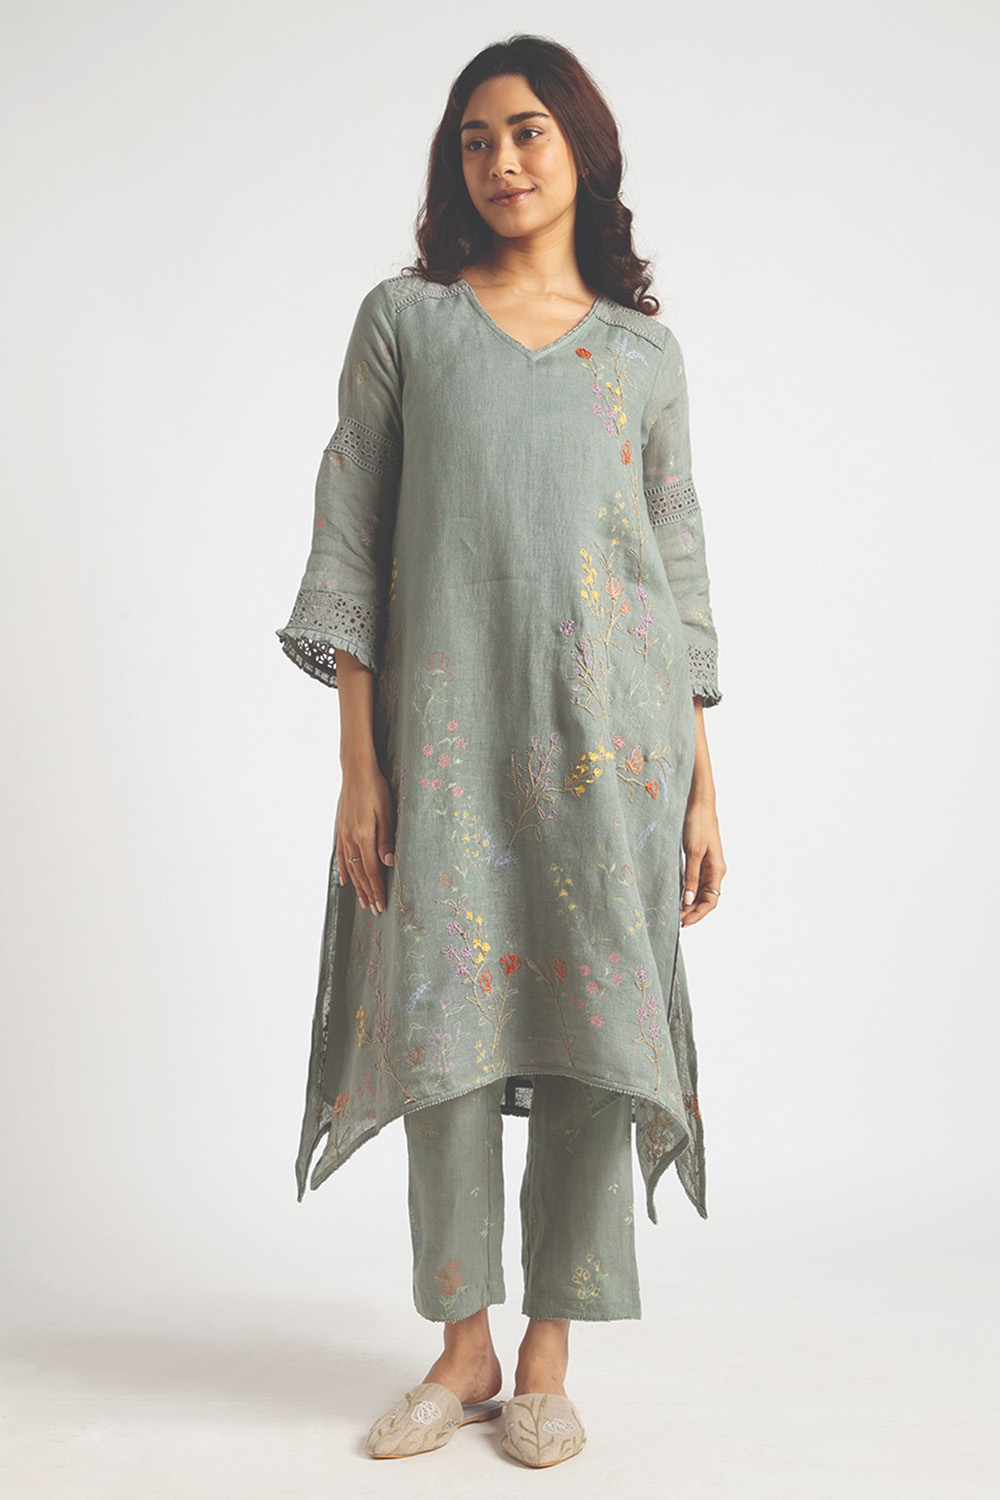 Walk in the Clouds Fly Free Tunic & Pant Set